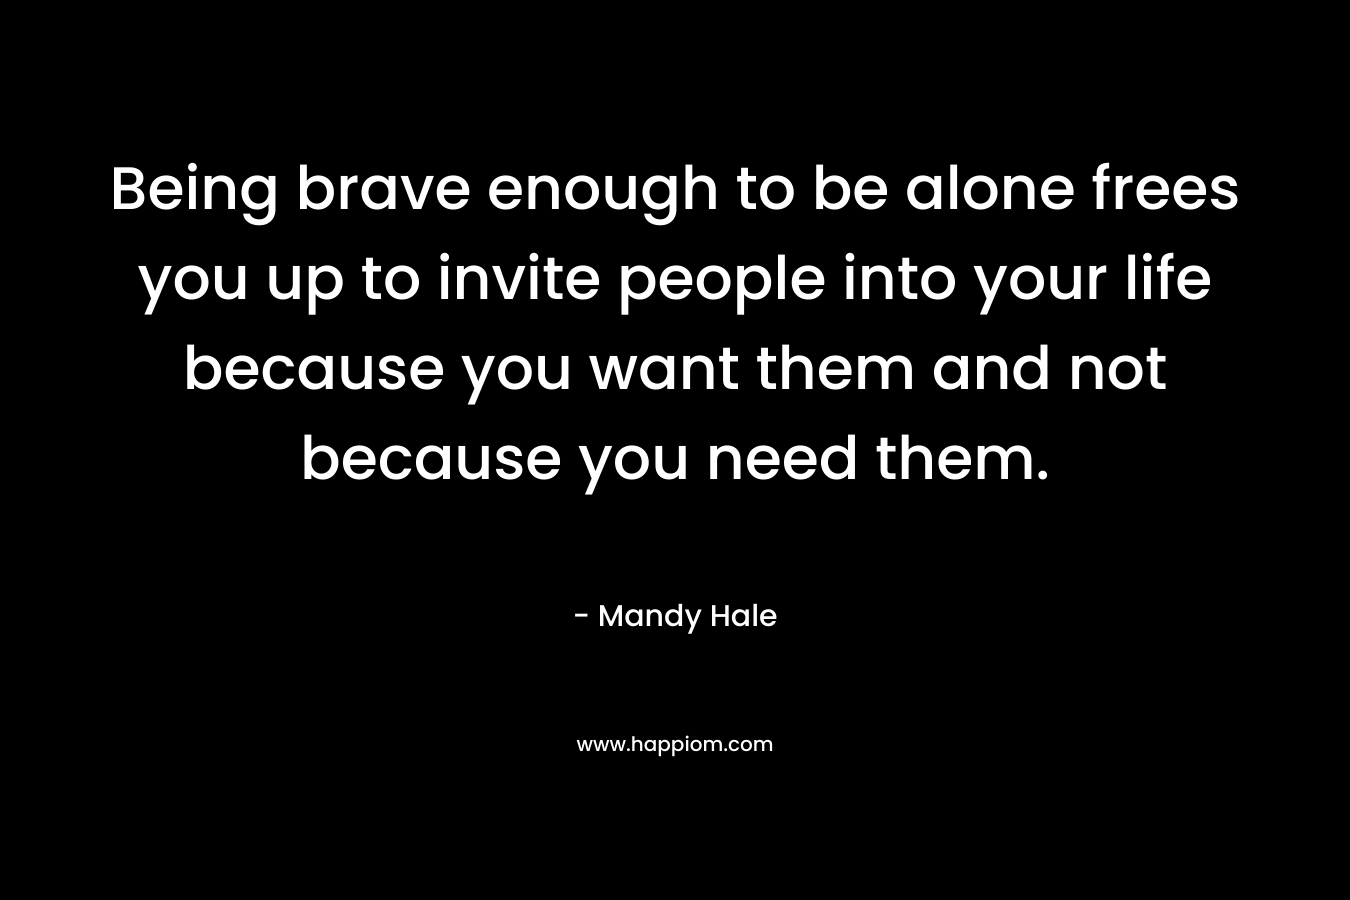 Being brave enough to be alone frees you up to invite people into your life because you want them and not because you need them.